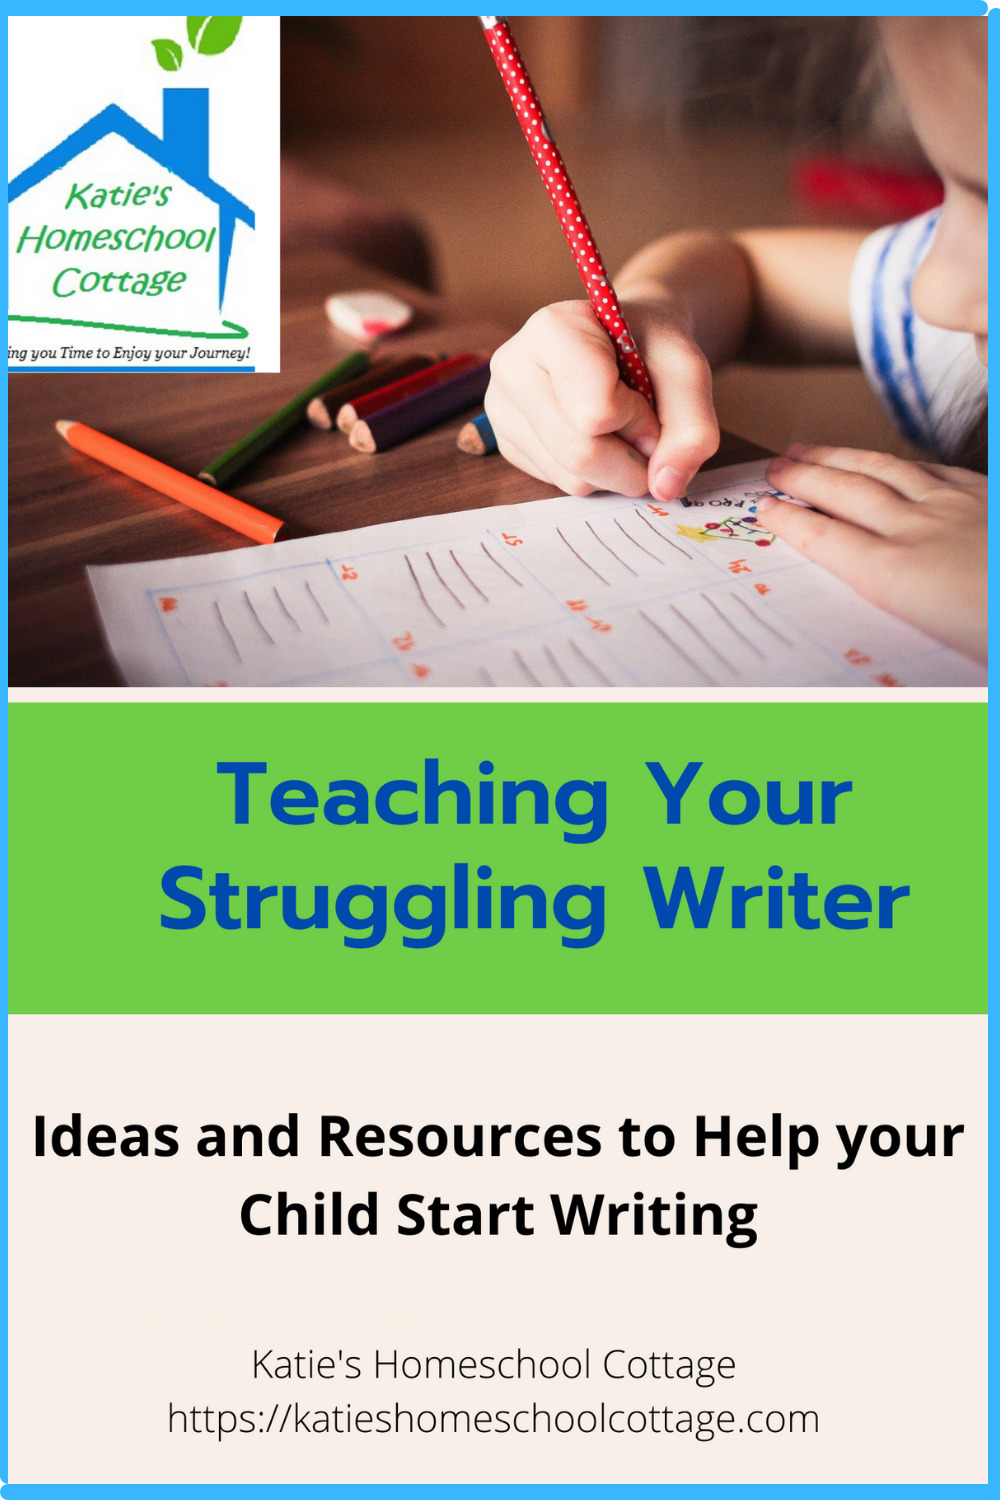 how-to-teach-writing-in-your-homeschool-katie-s-homeschool-cottage